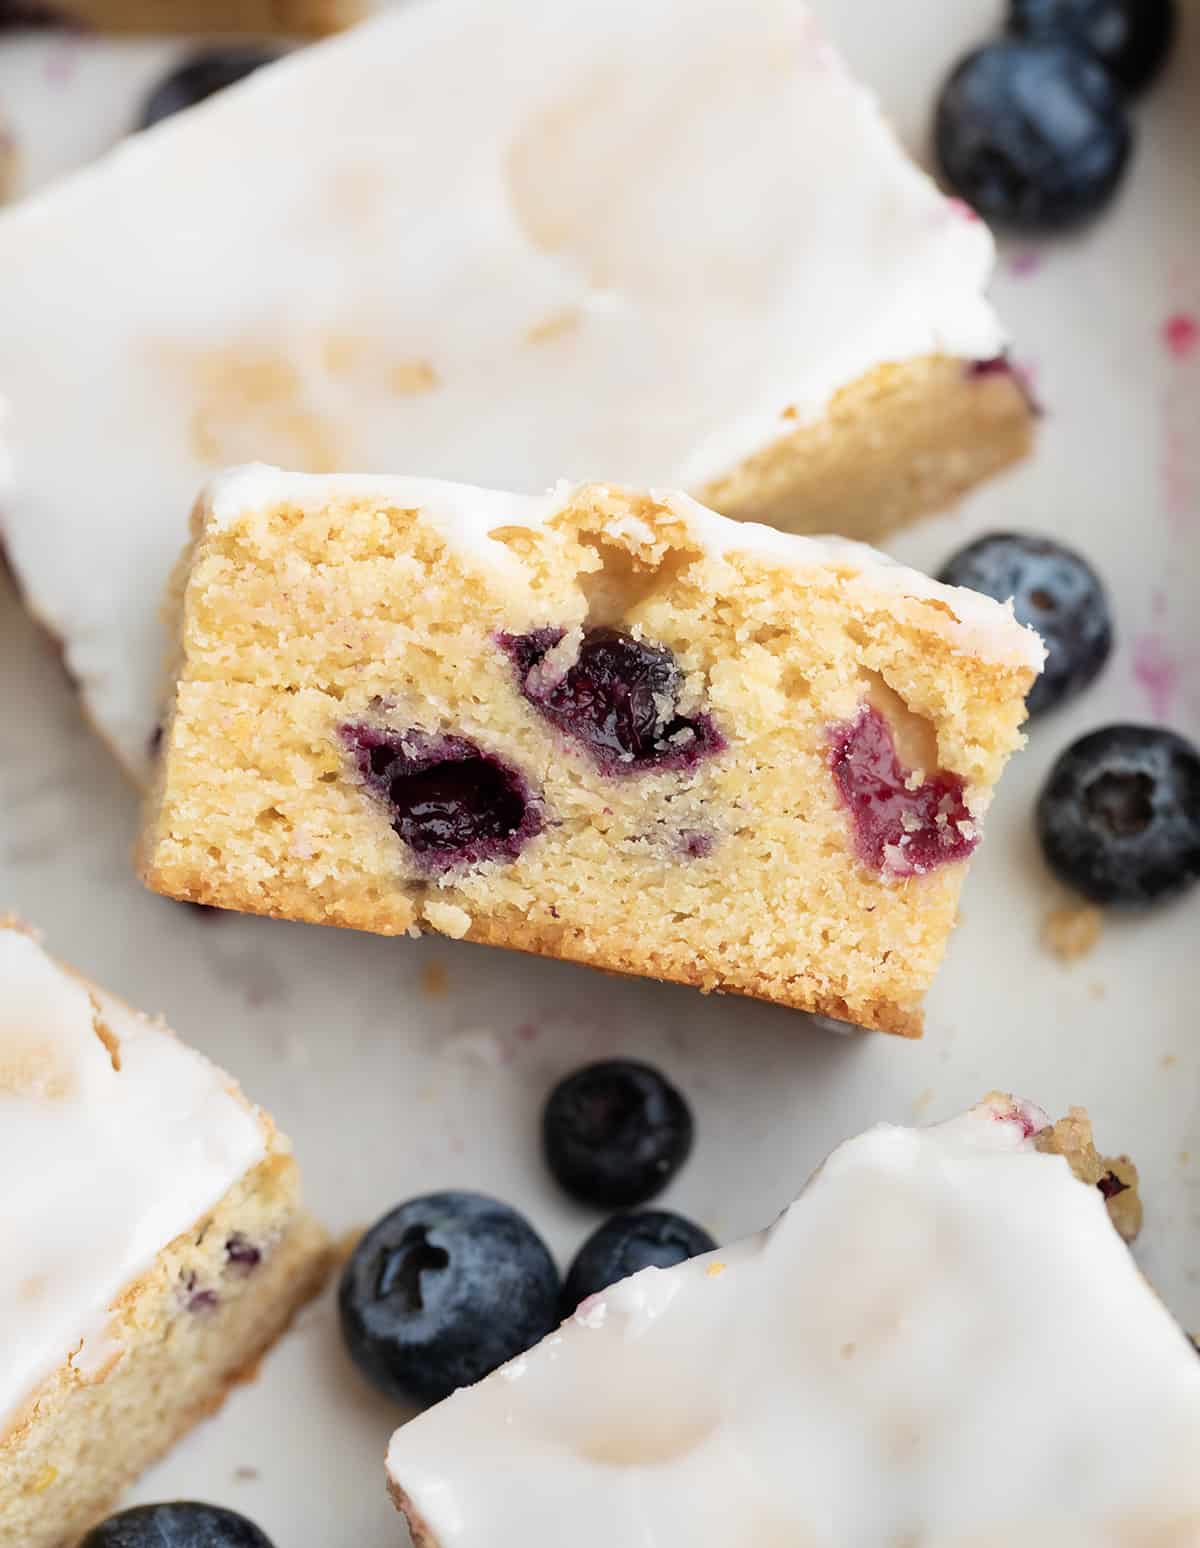 Close up of a cut Lemon Blueberry Blondie surrounded by more blondies.